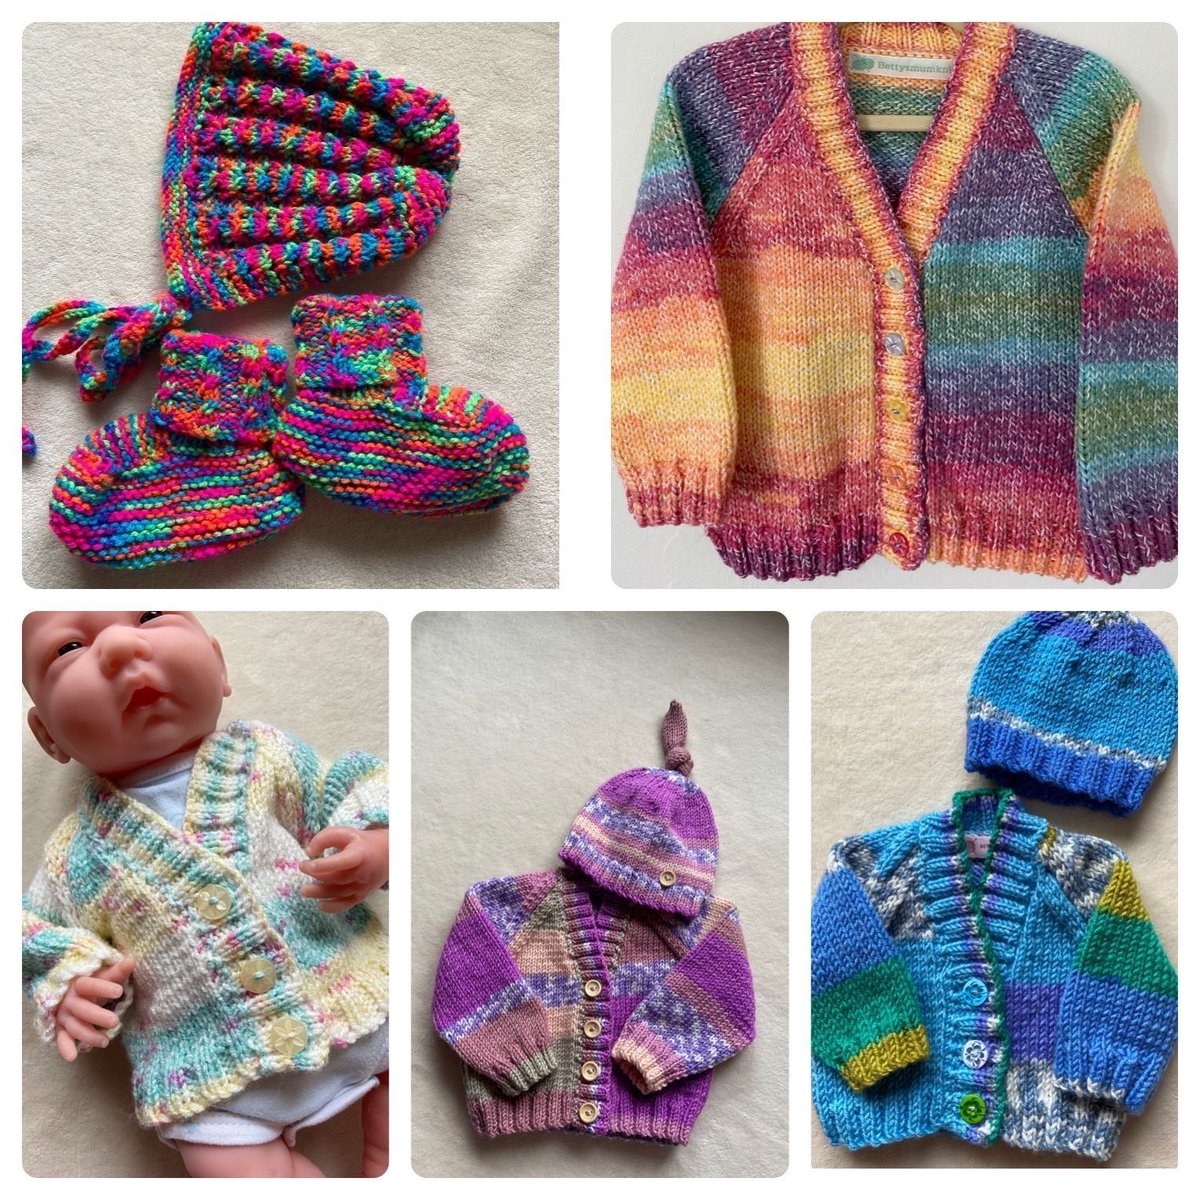 X for eXcellent quality baby knitwear in sizes from premature to 12 months pop over to my Etsy shop and have a browse 👀 🌈🧶 Bettysmumknits.etsy.com #MHHSBD #ShopIndie #AlphabetChallenge